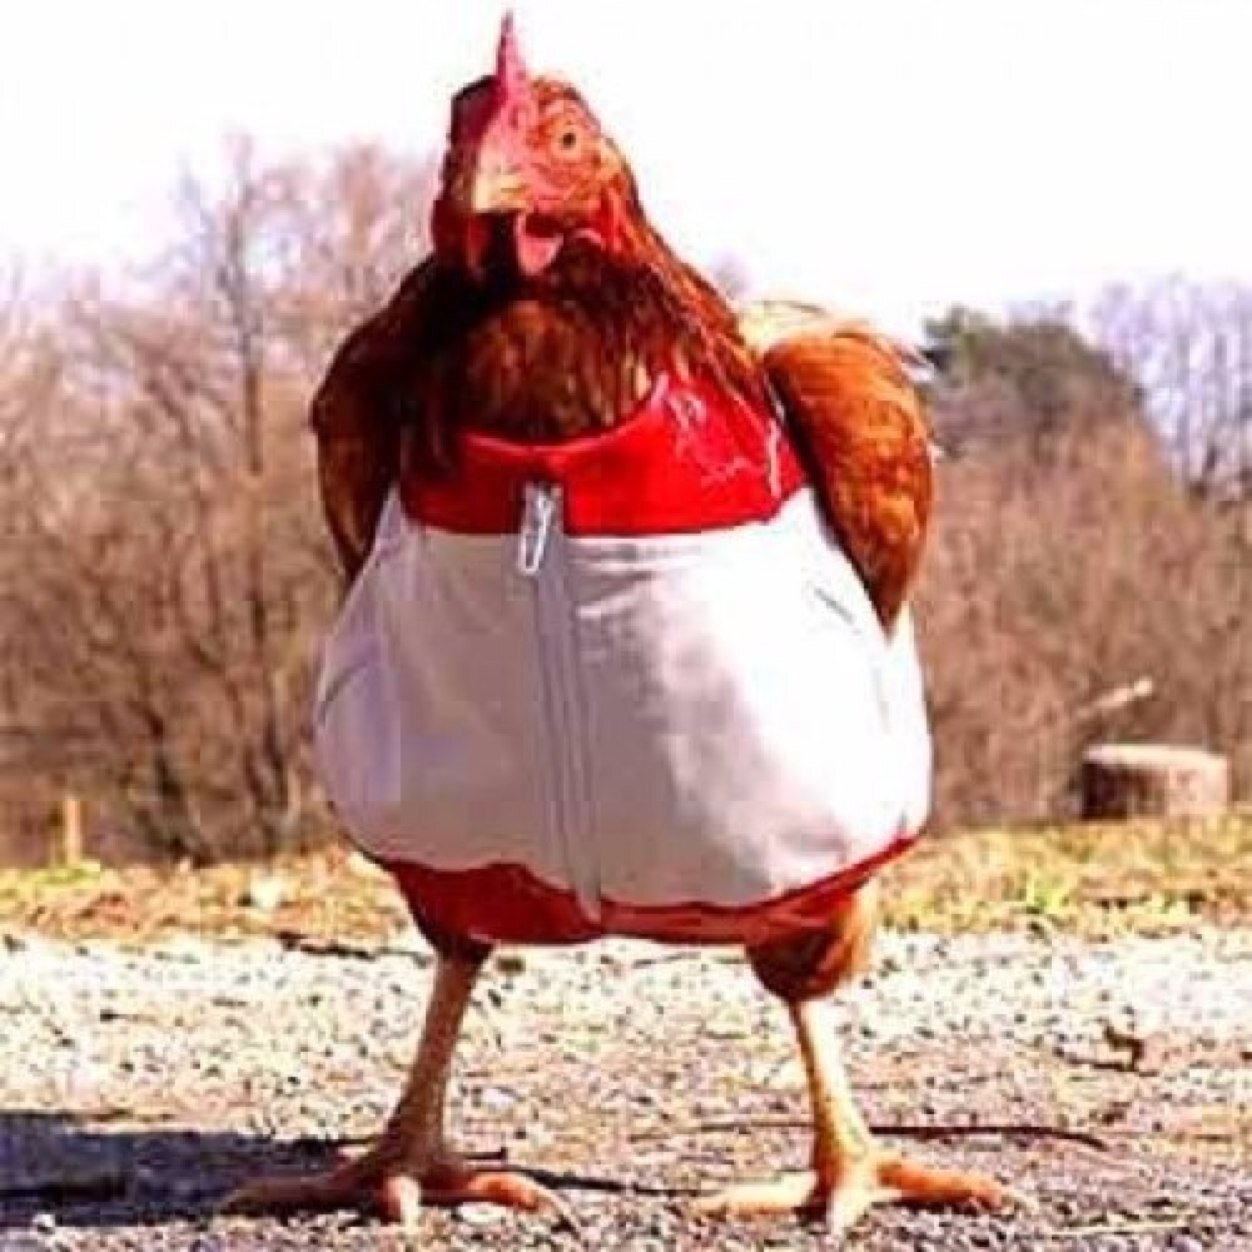 Funny Chicken Wearing Shorts Picture For Whatsapp